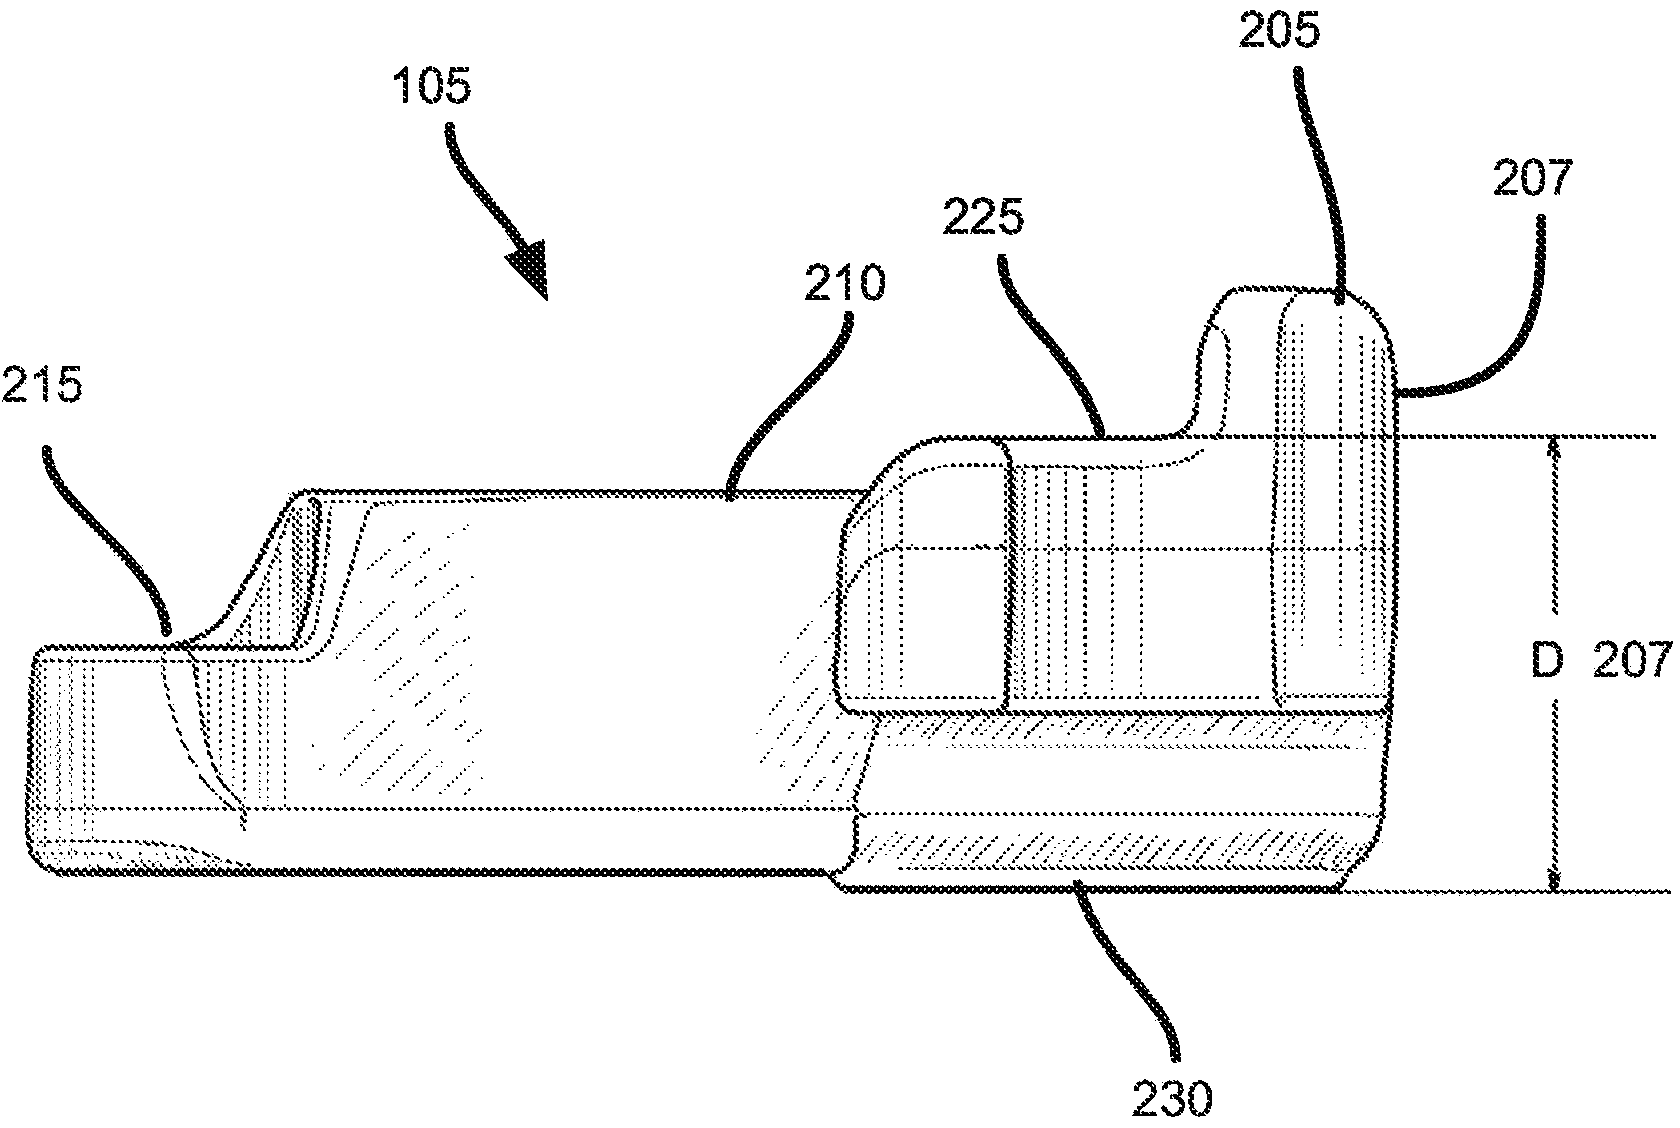 Method and system for manufacturing railcar coupler locks